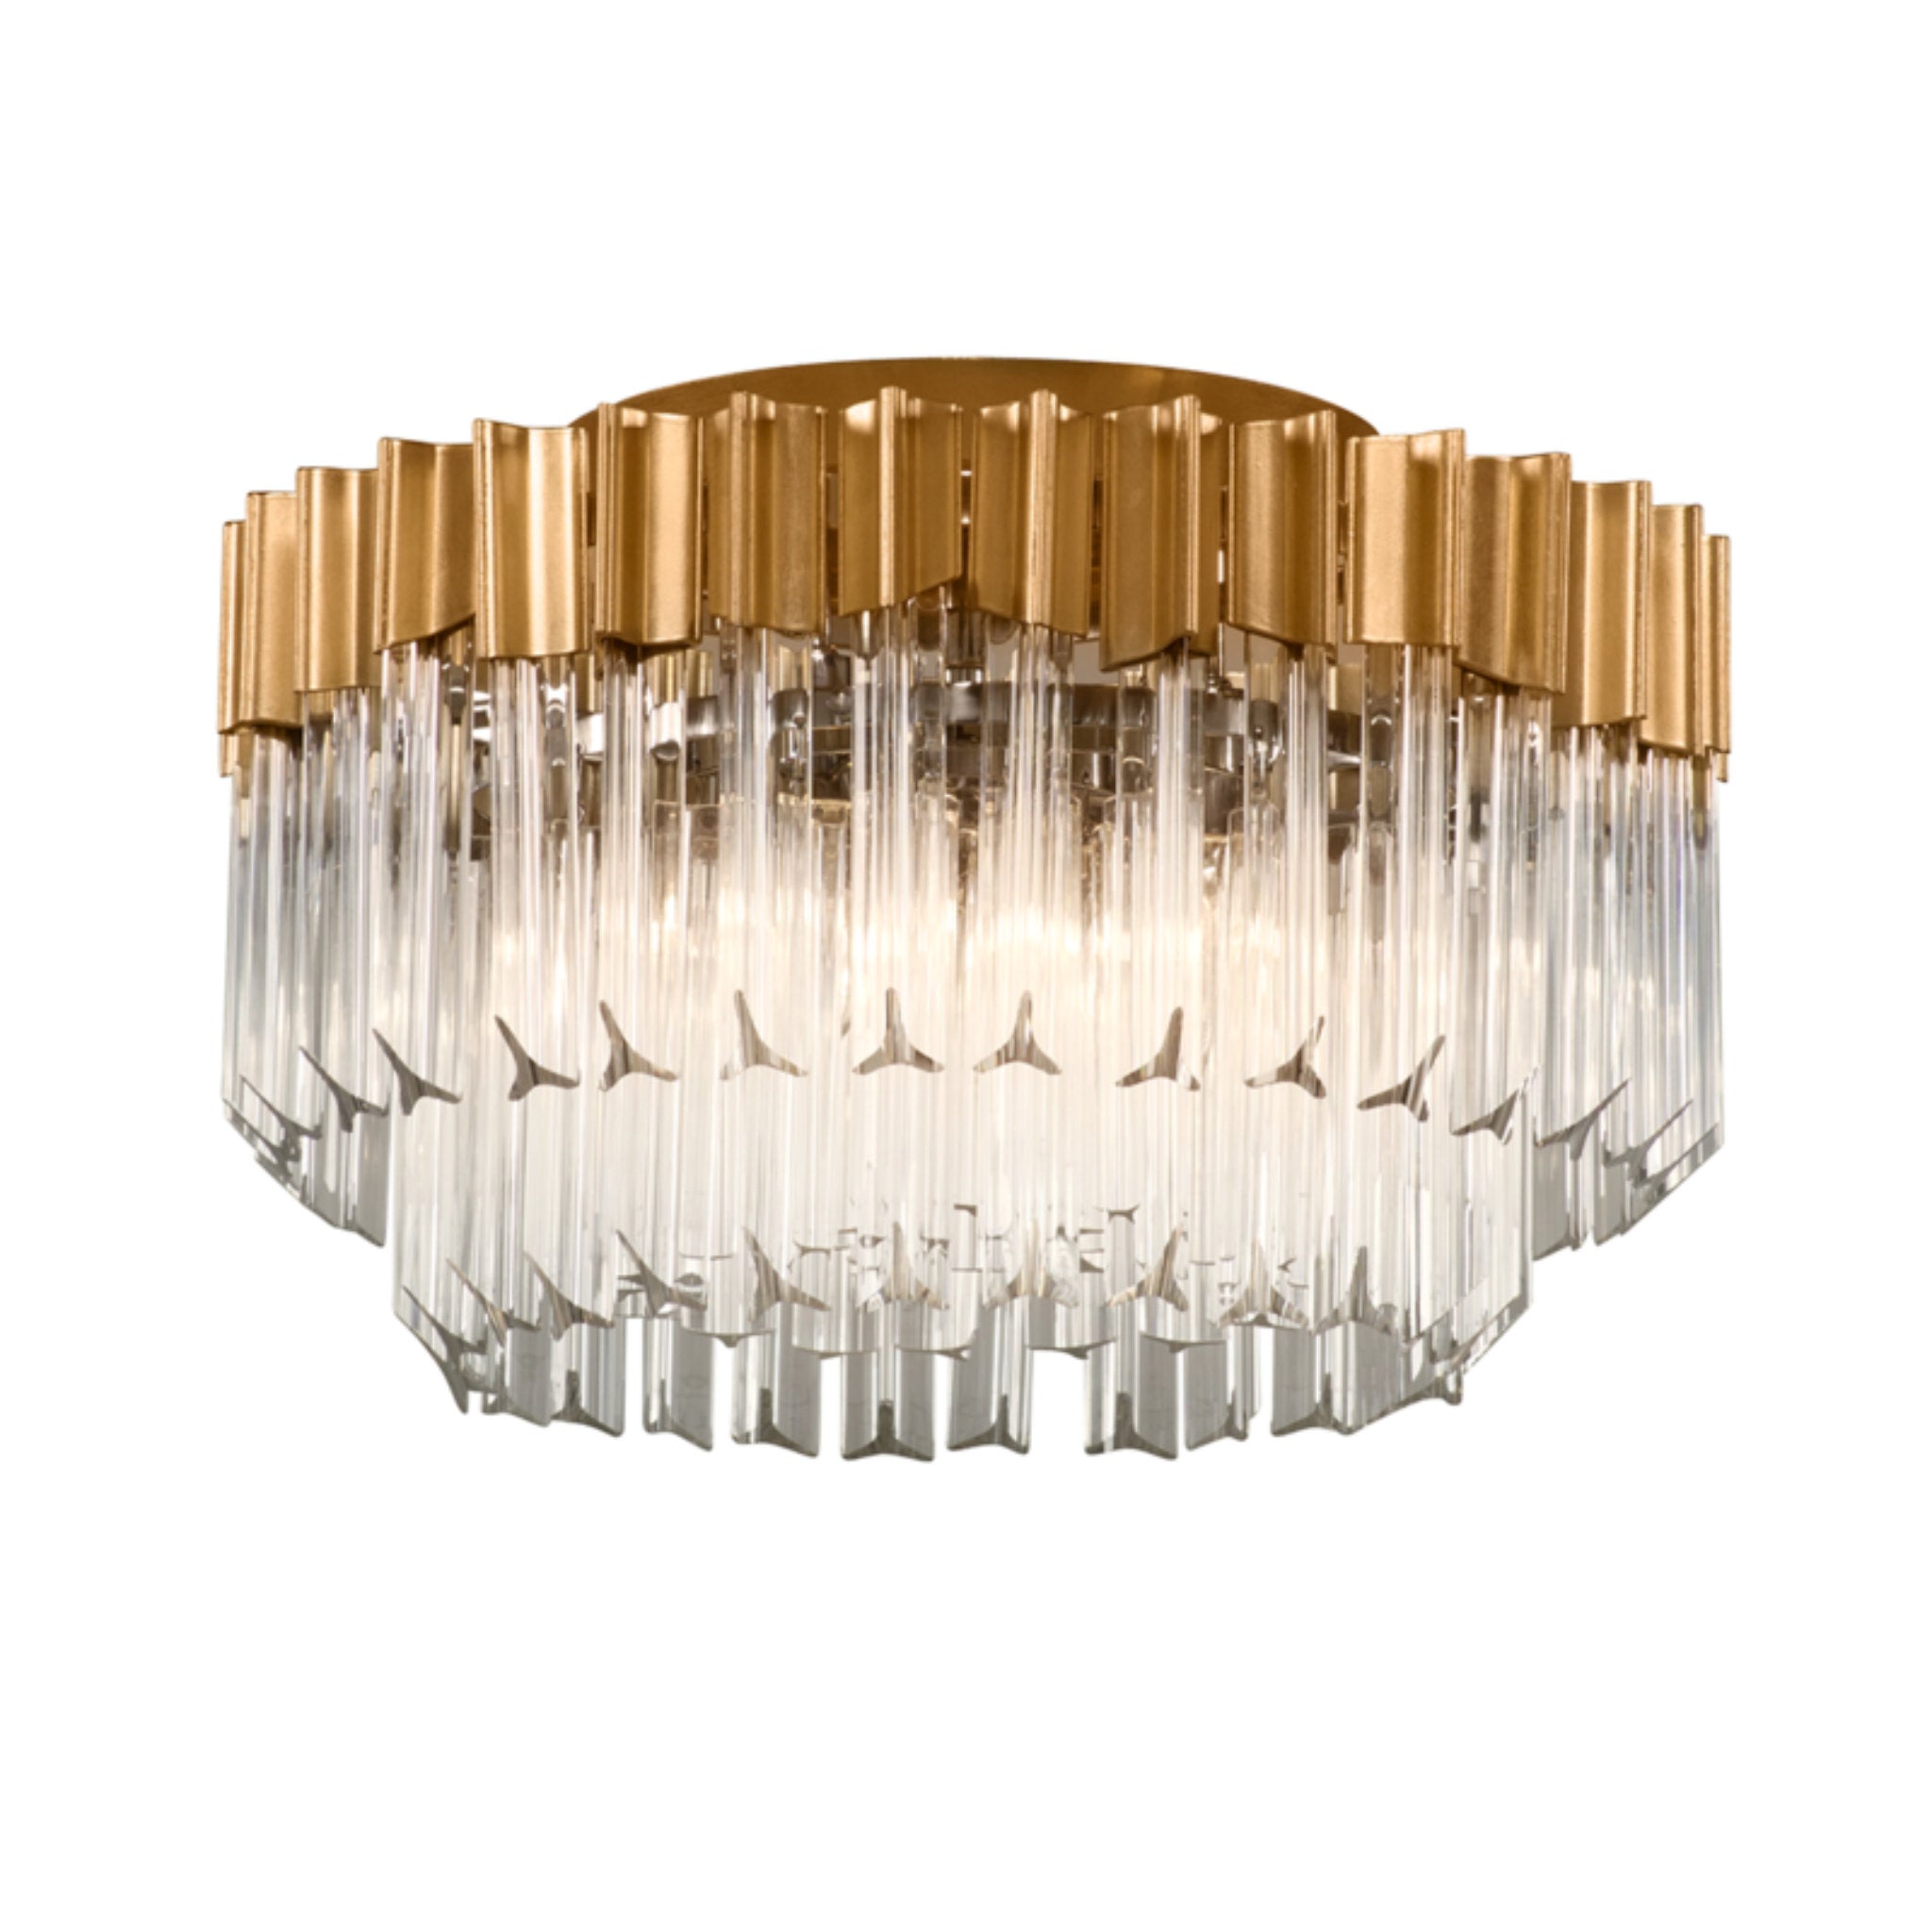 Charisma 3 Light Semi Flush in Gold Leaf W Polished Stainless